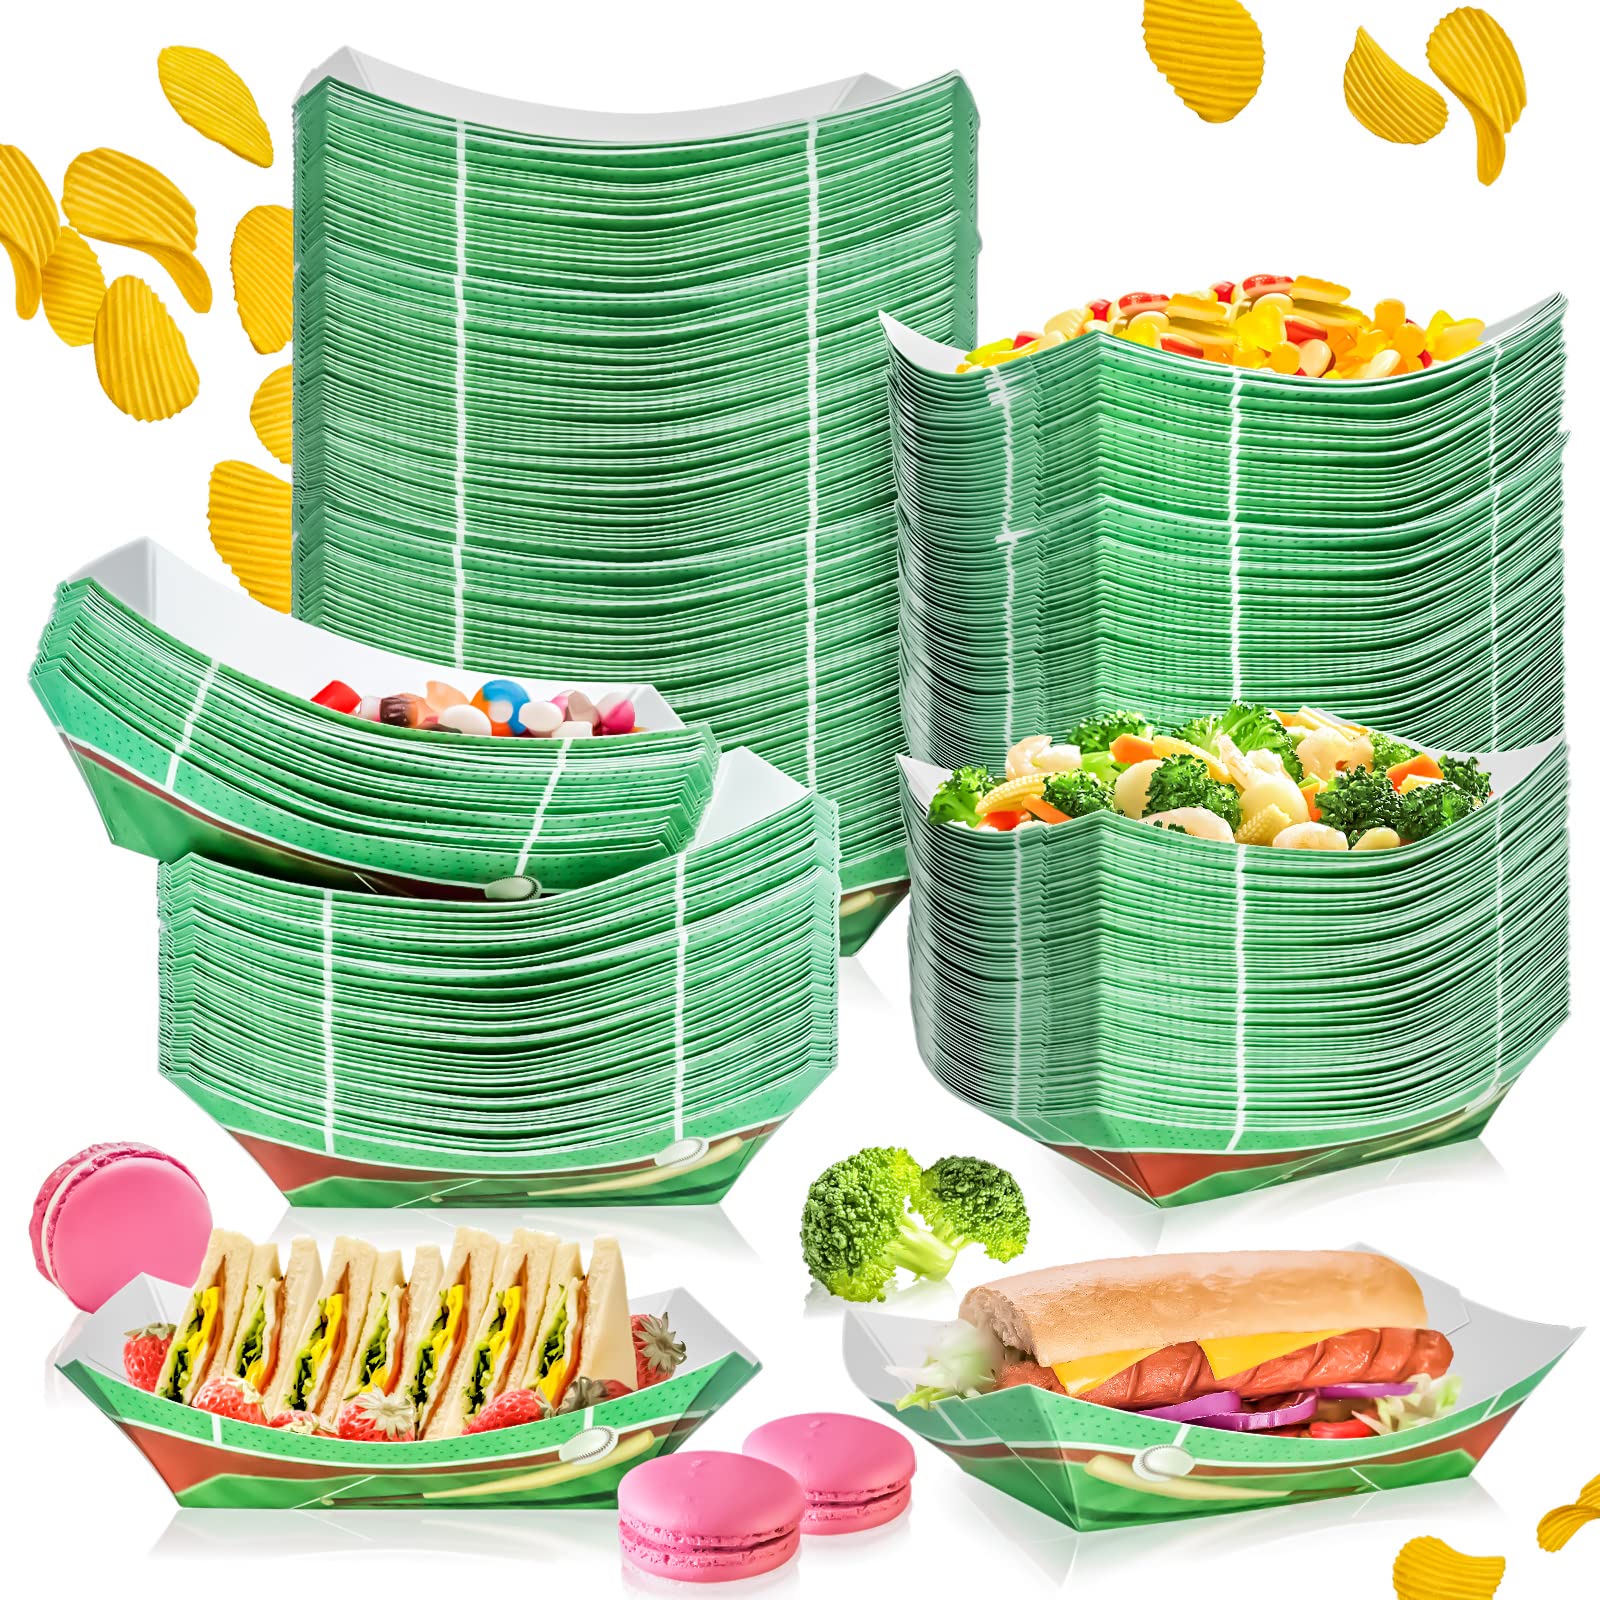 MotBach 120 Pack Baseball Theme Paper Food Boat Trays, Baseball Party Supplies, 2 Lb Disposable Paper Serving Boat Plate Trays for Baseball Birthday Party Decorations Baseball Themed Party Favors